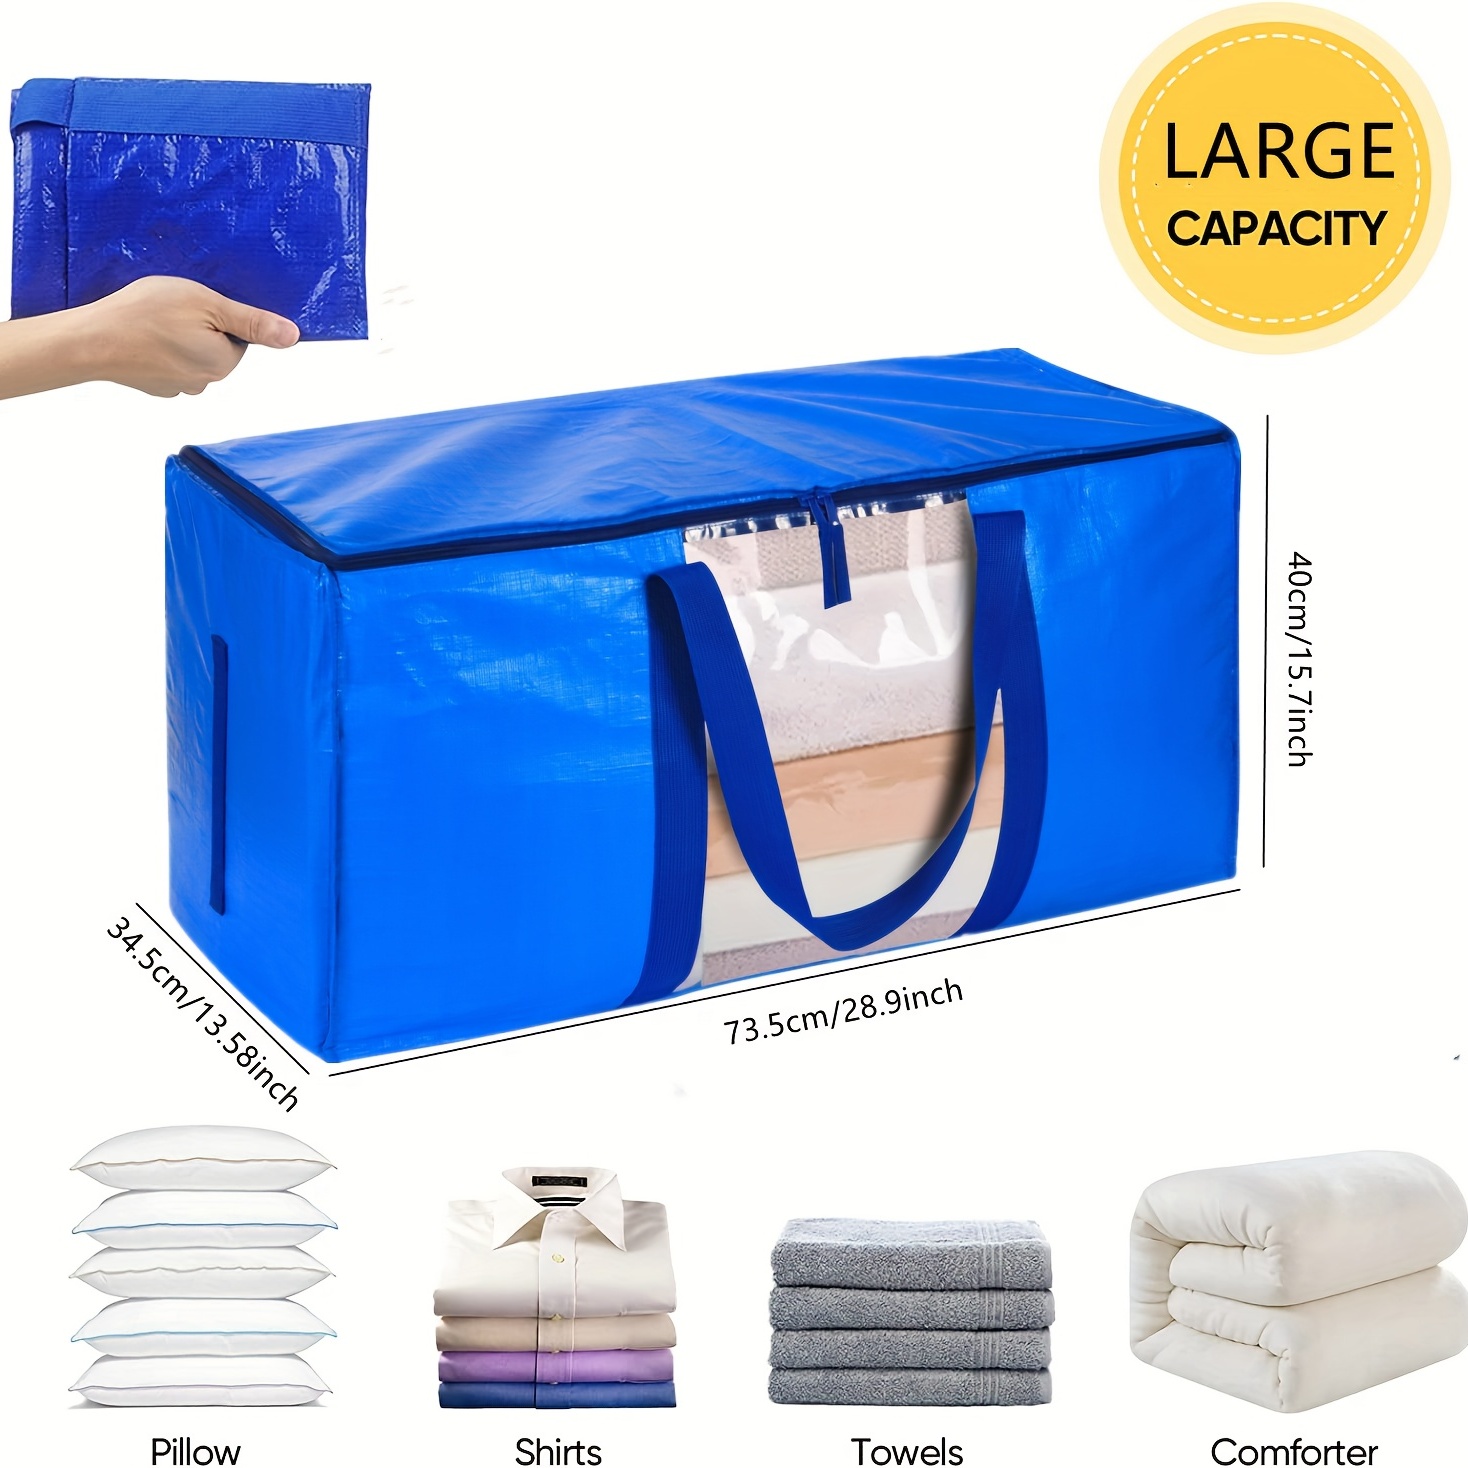 1pc Heavy Duty Extra Large Storage Bag With Backpack Straps